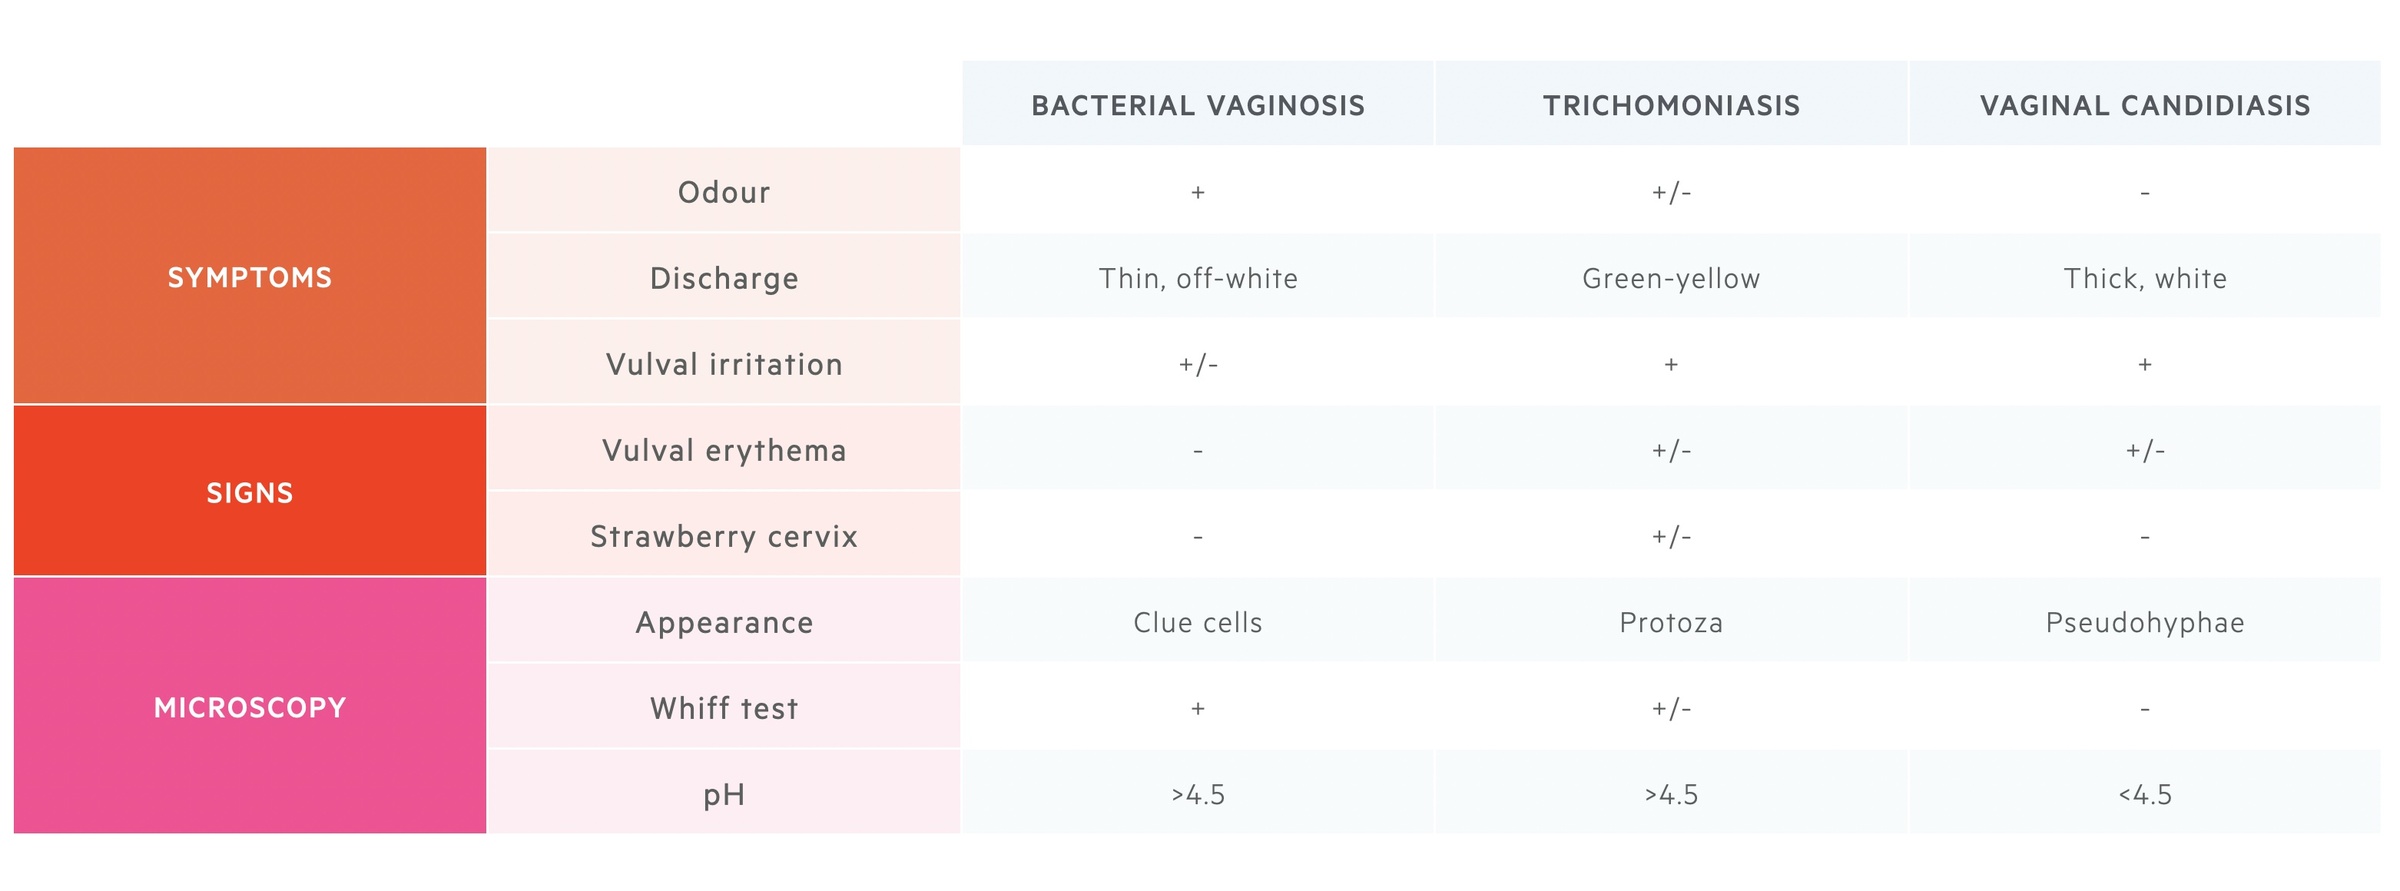 Comparison of candidiasis, trichomoniasis and BV